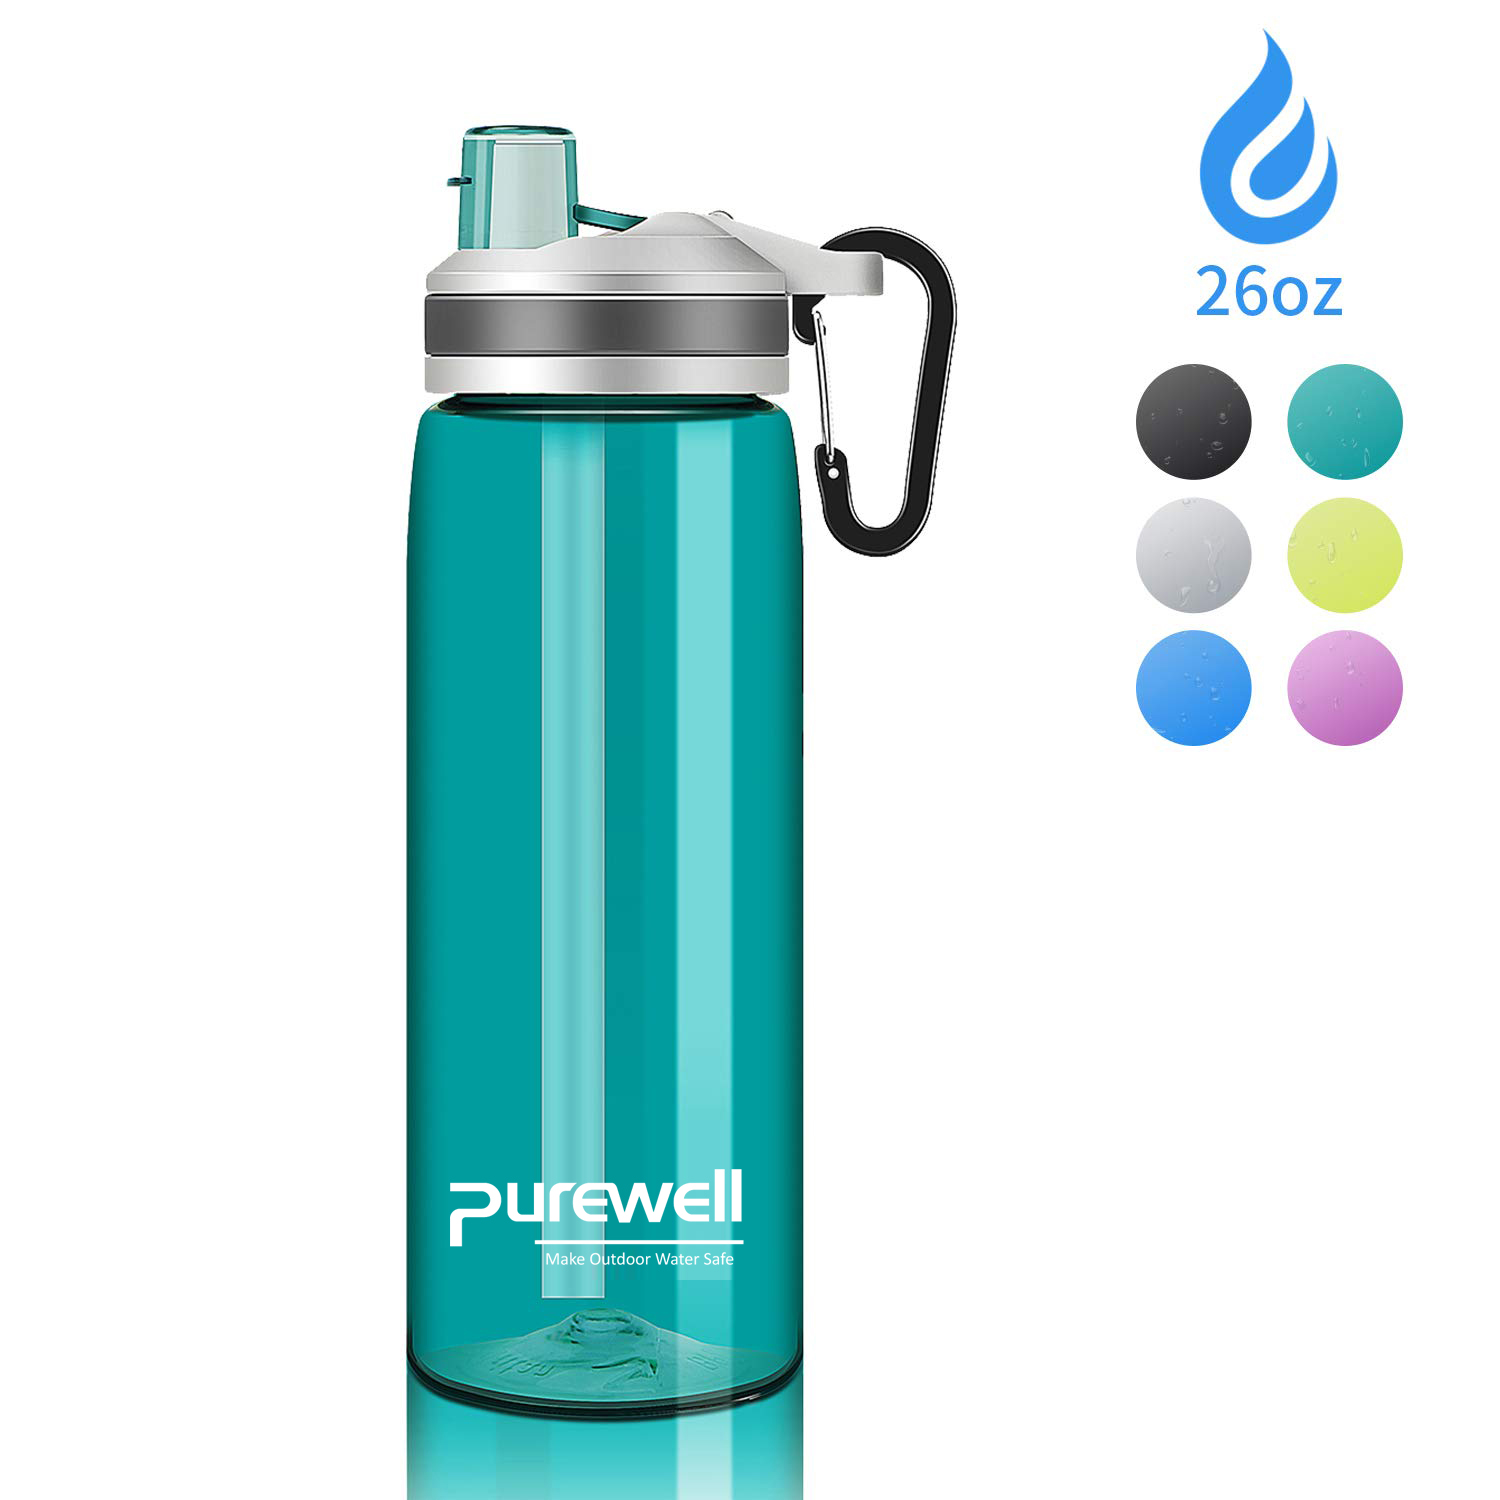 Purewell Array image571